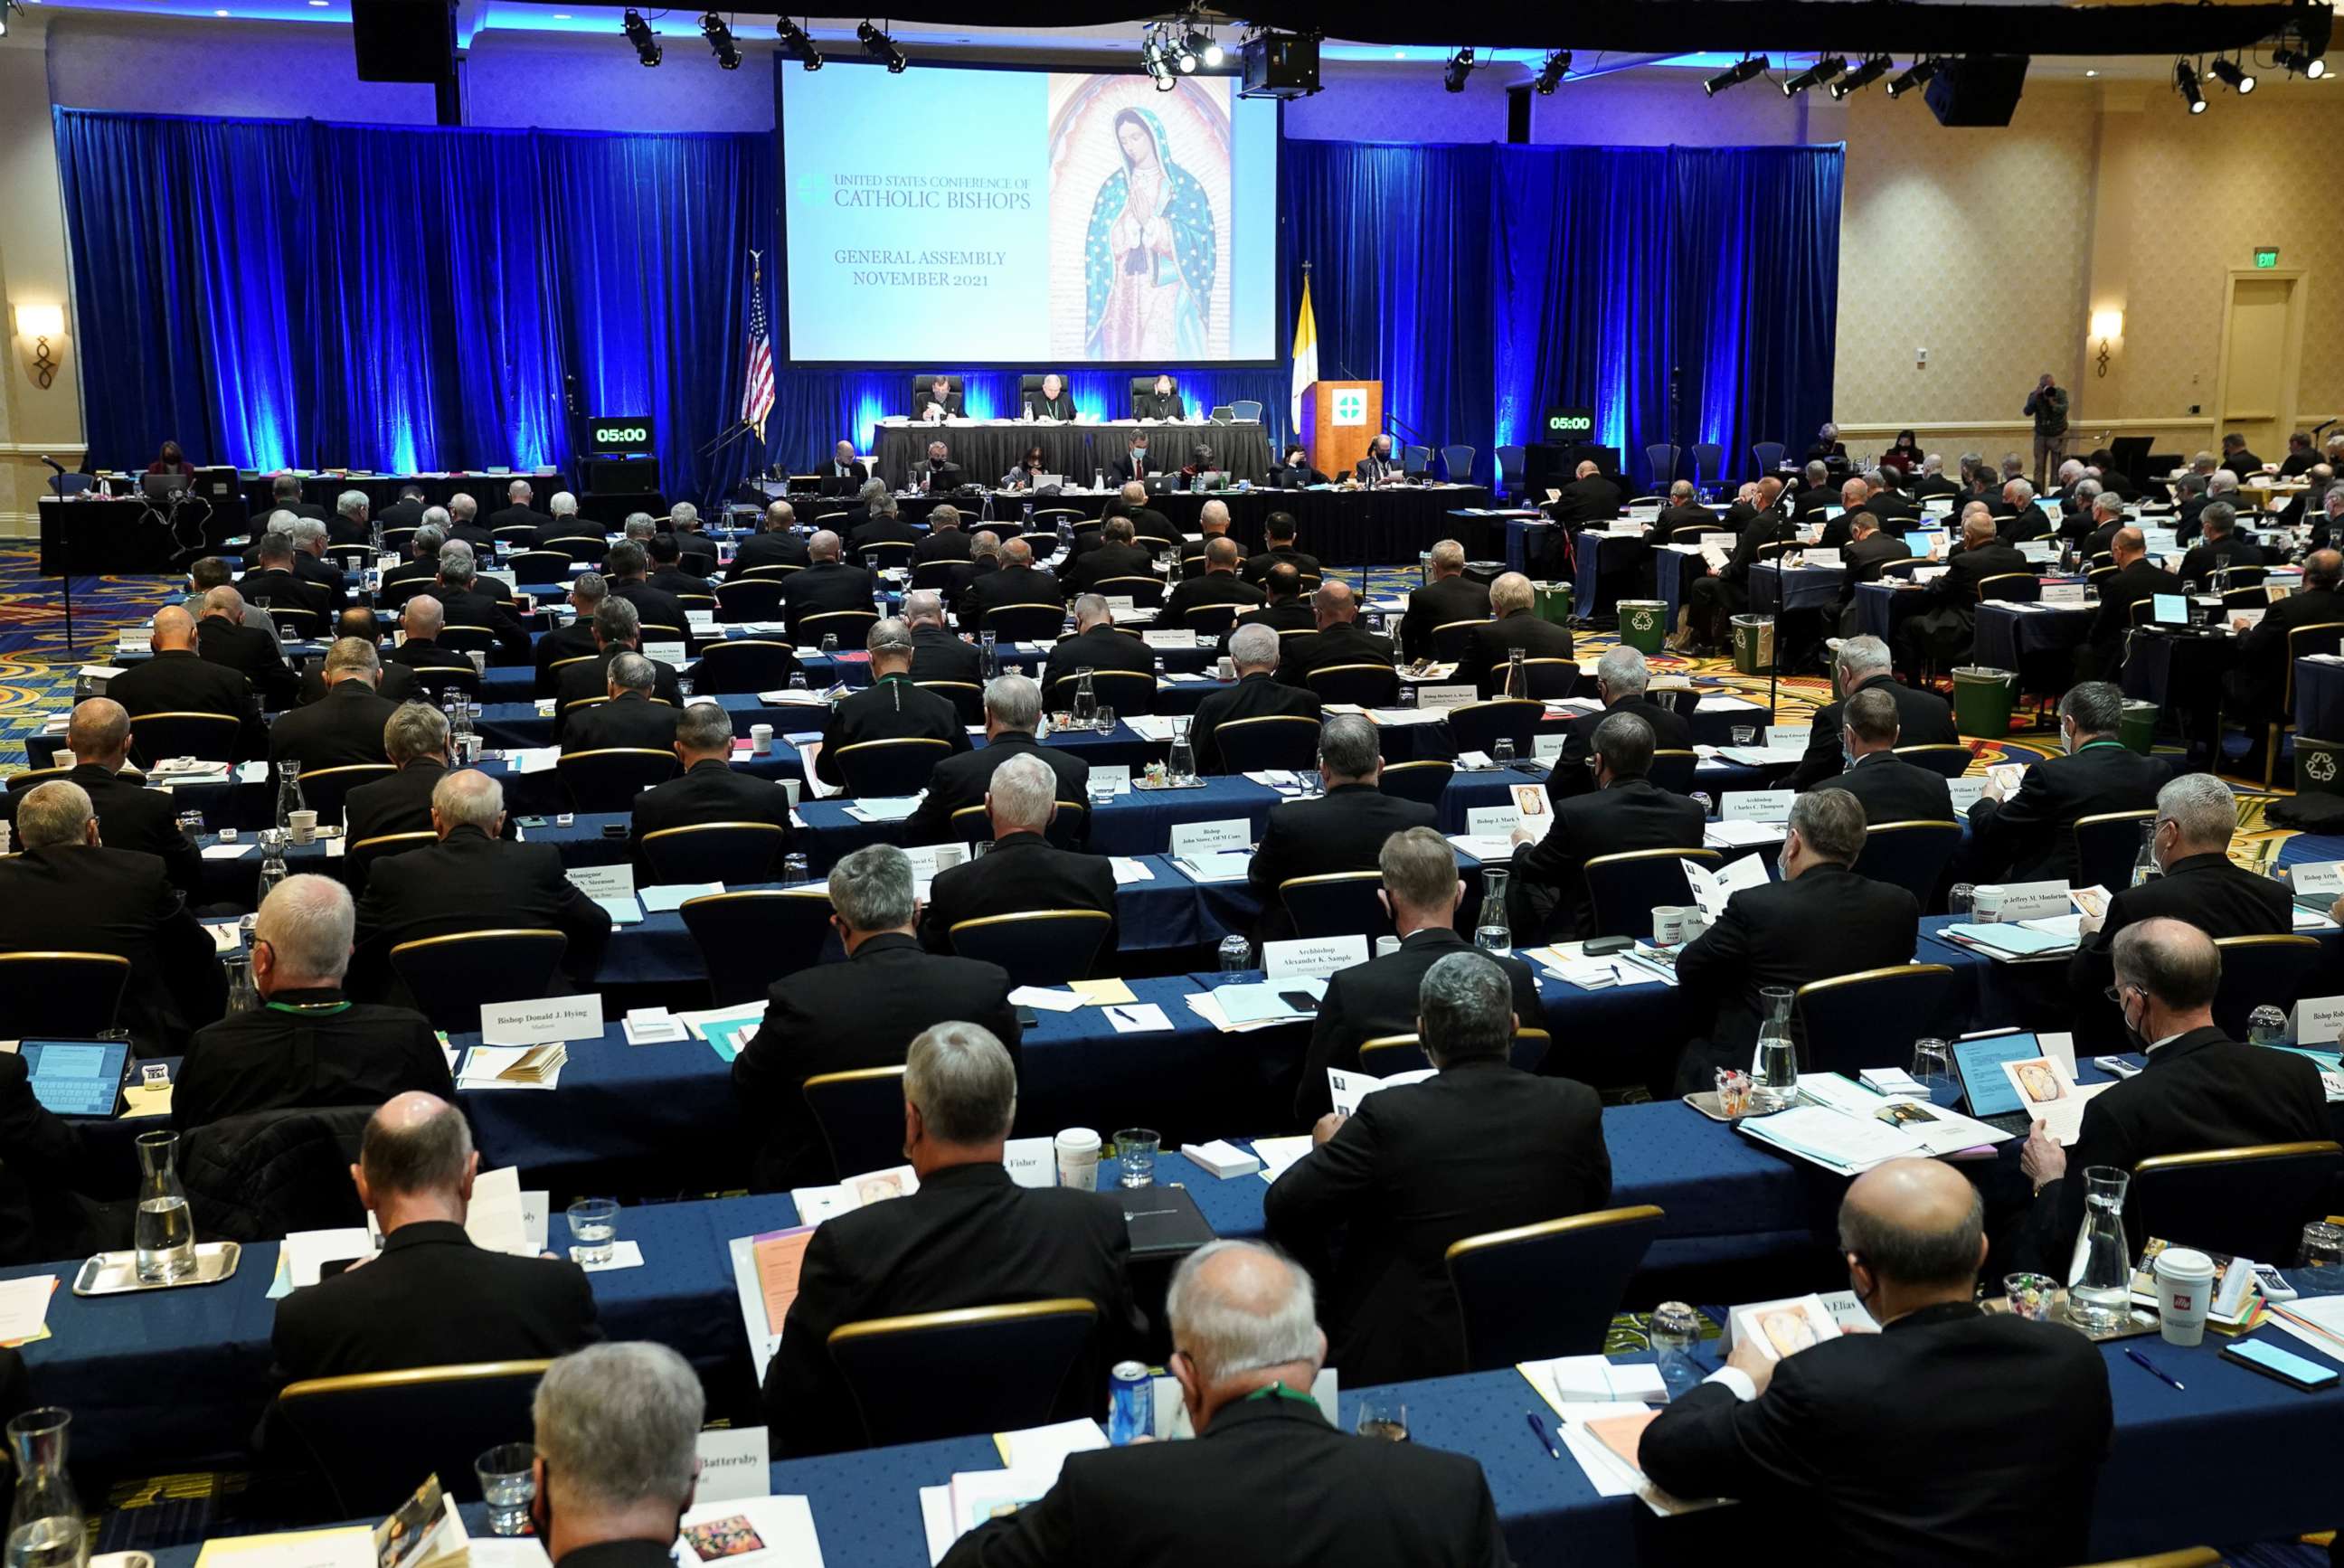 PHOTO: The U.S. Conference of Catholic Bishops (USCCB) hosts its annual General Assembly meeting in Baltimore, Nov. 16, 2021.